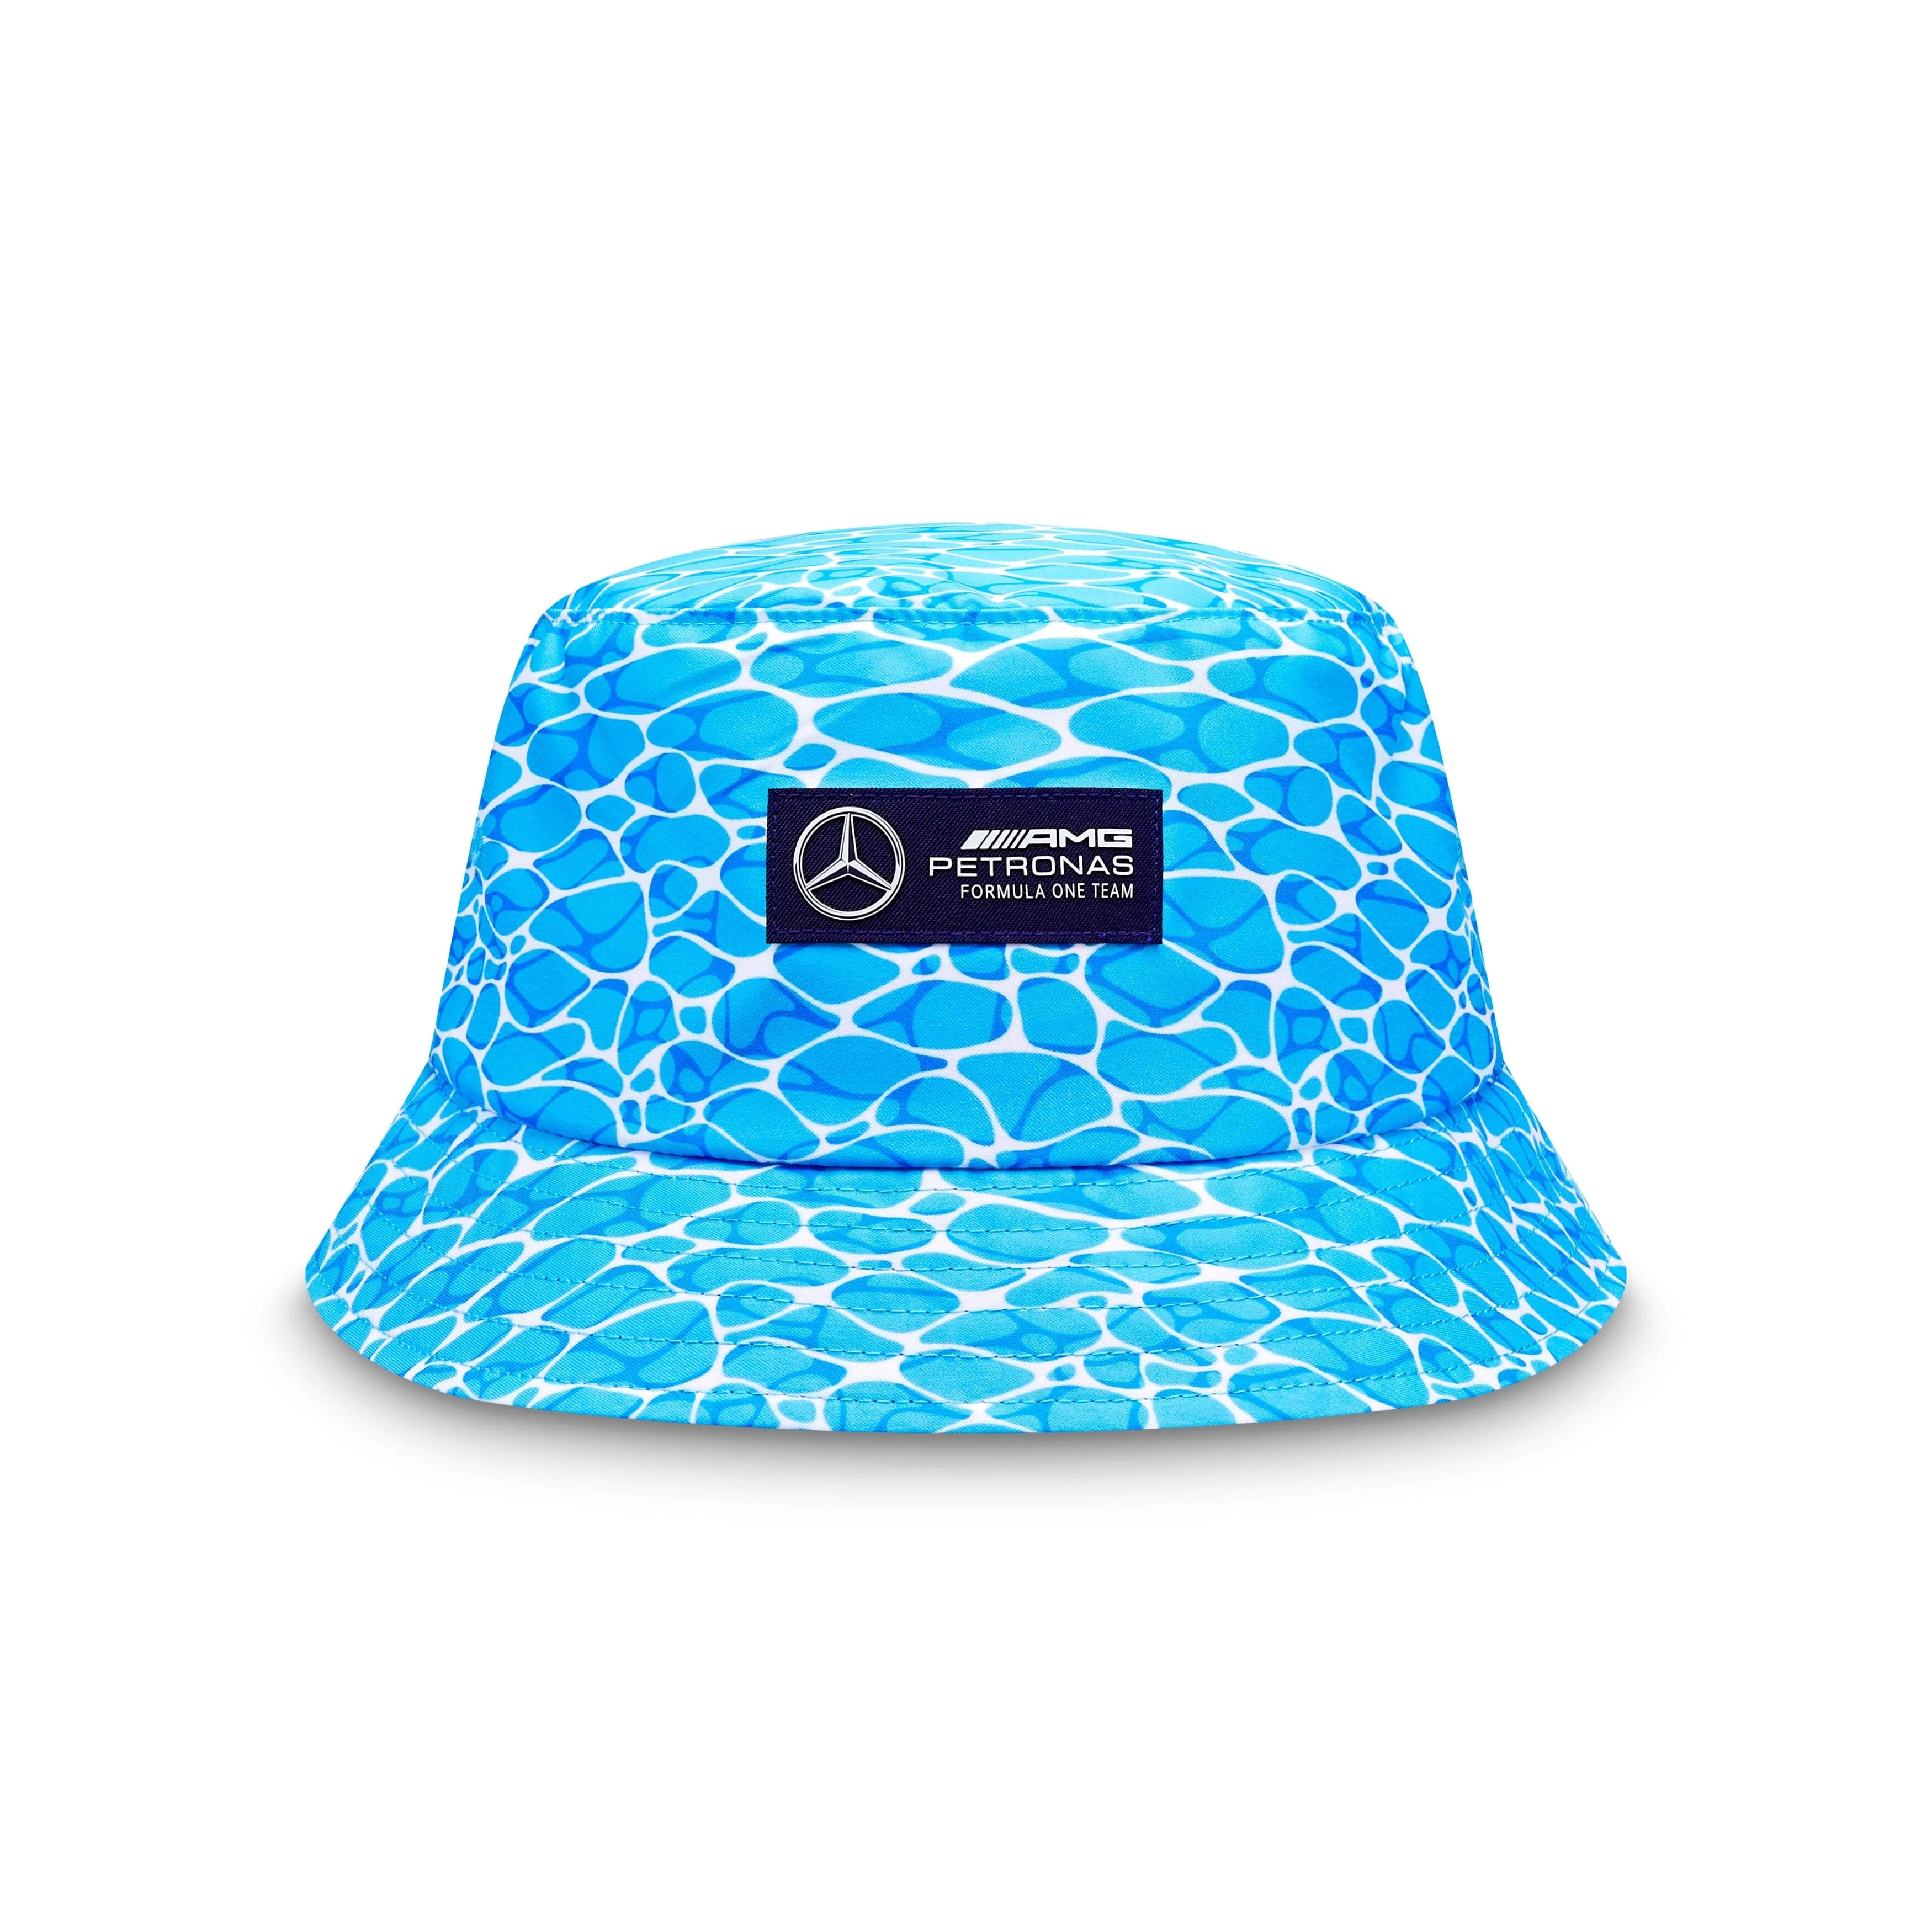 Mercedes Benz F1 Special Edition George Russell 2023 "No Diving" Miami USA GP Bucket Hat Blue